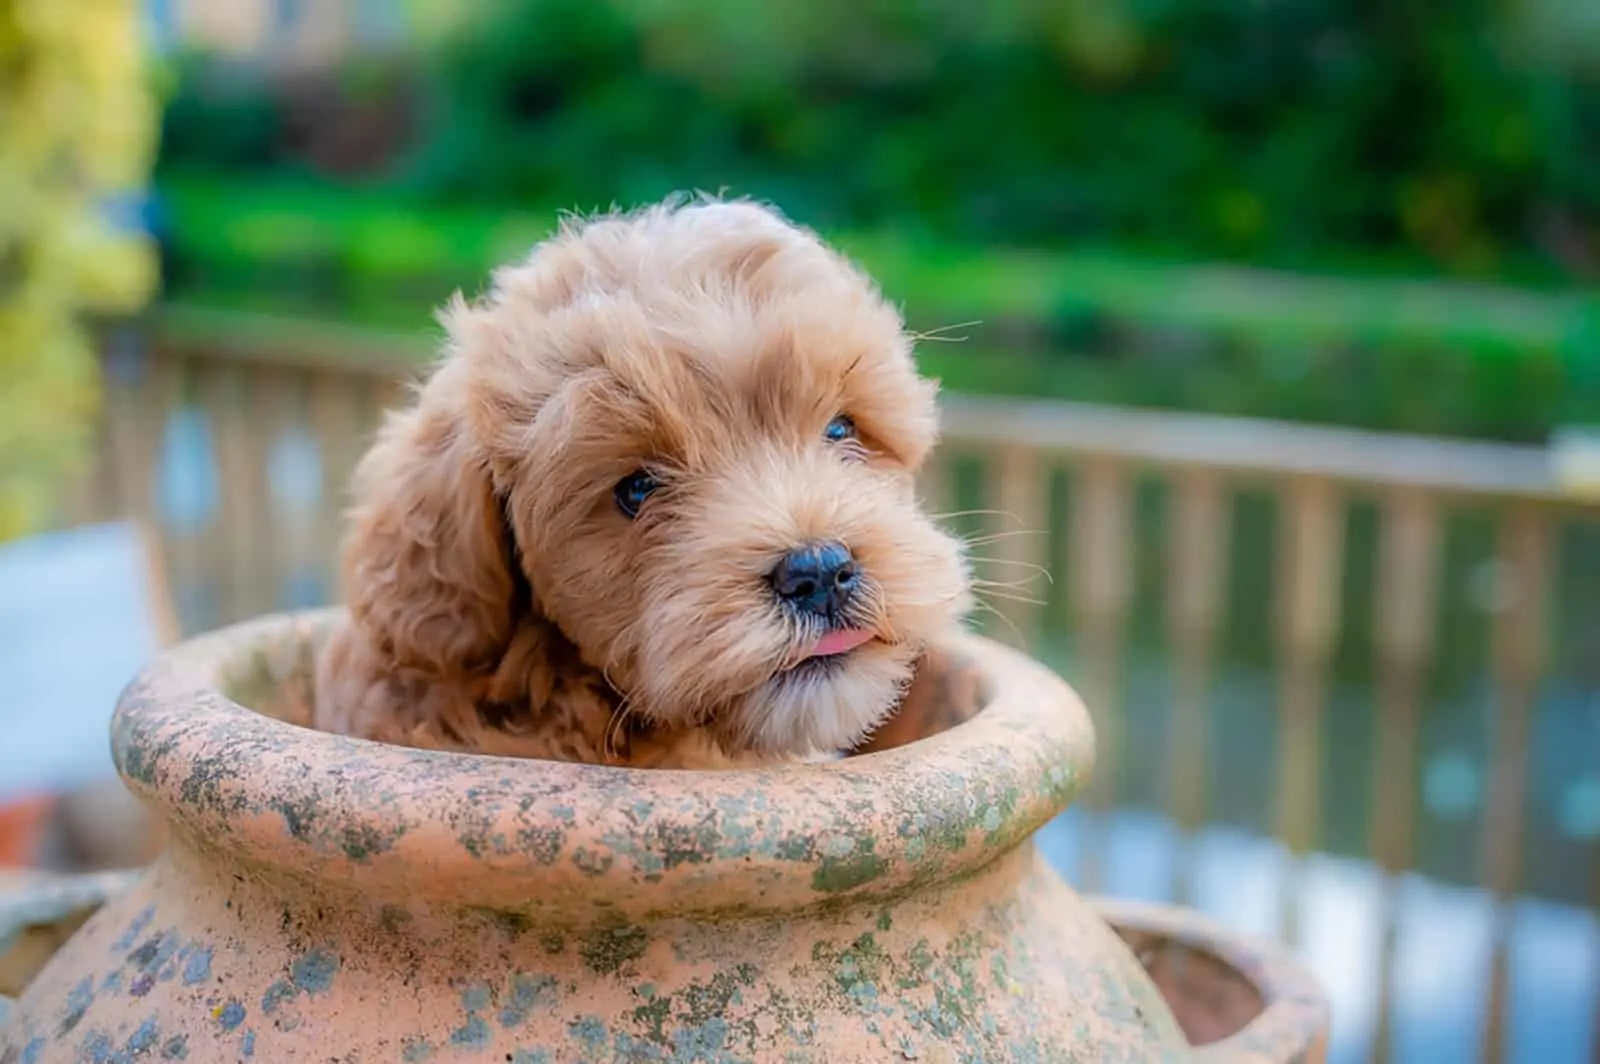 cavapoochon puppy plays in a plant pot in the garden